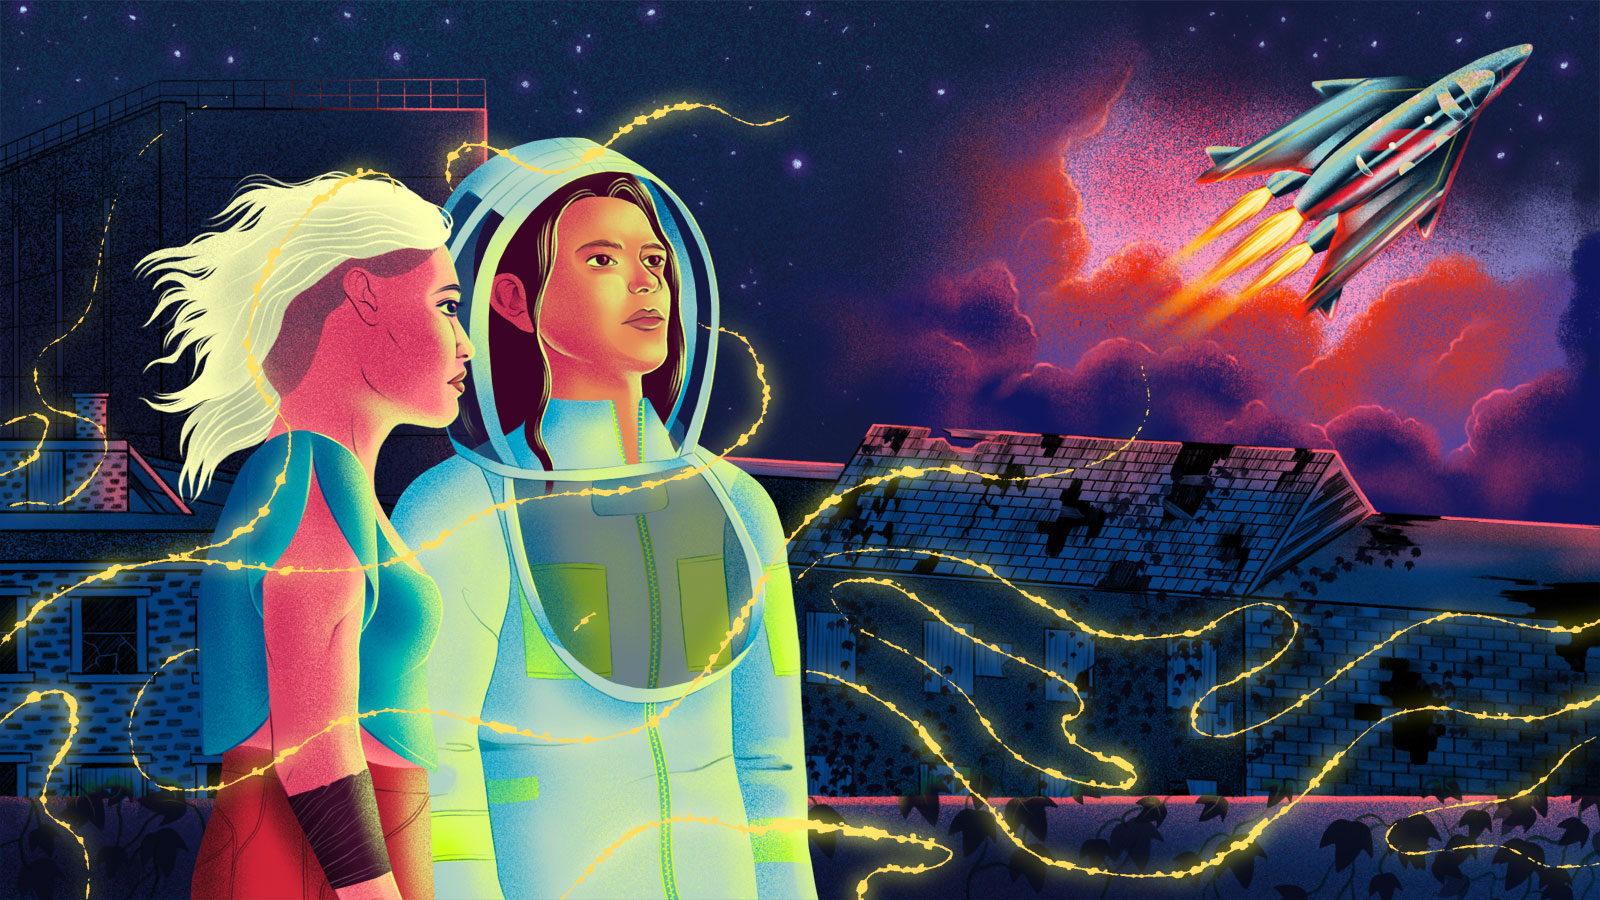 Illustration of two futuristic people looking at the night sky as a spaceship lifts off through the clouds